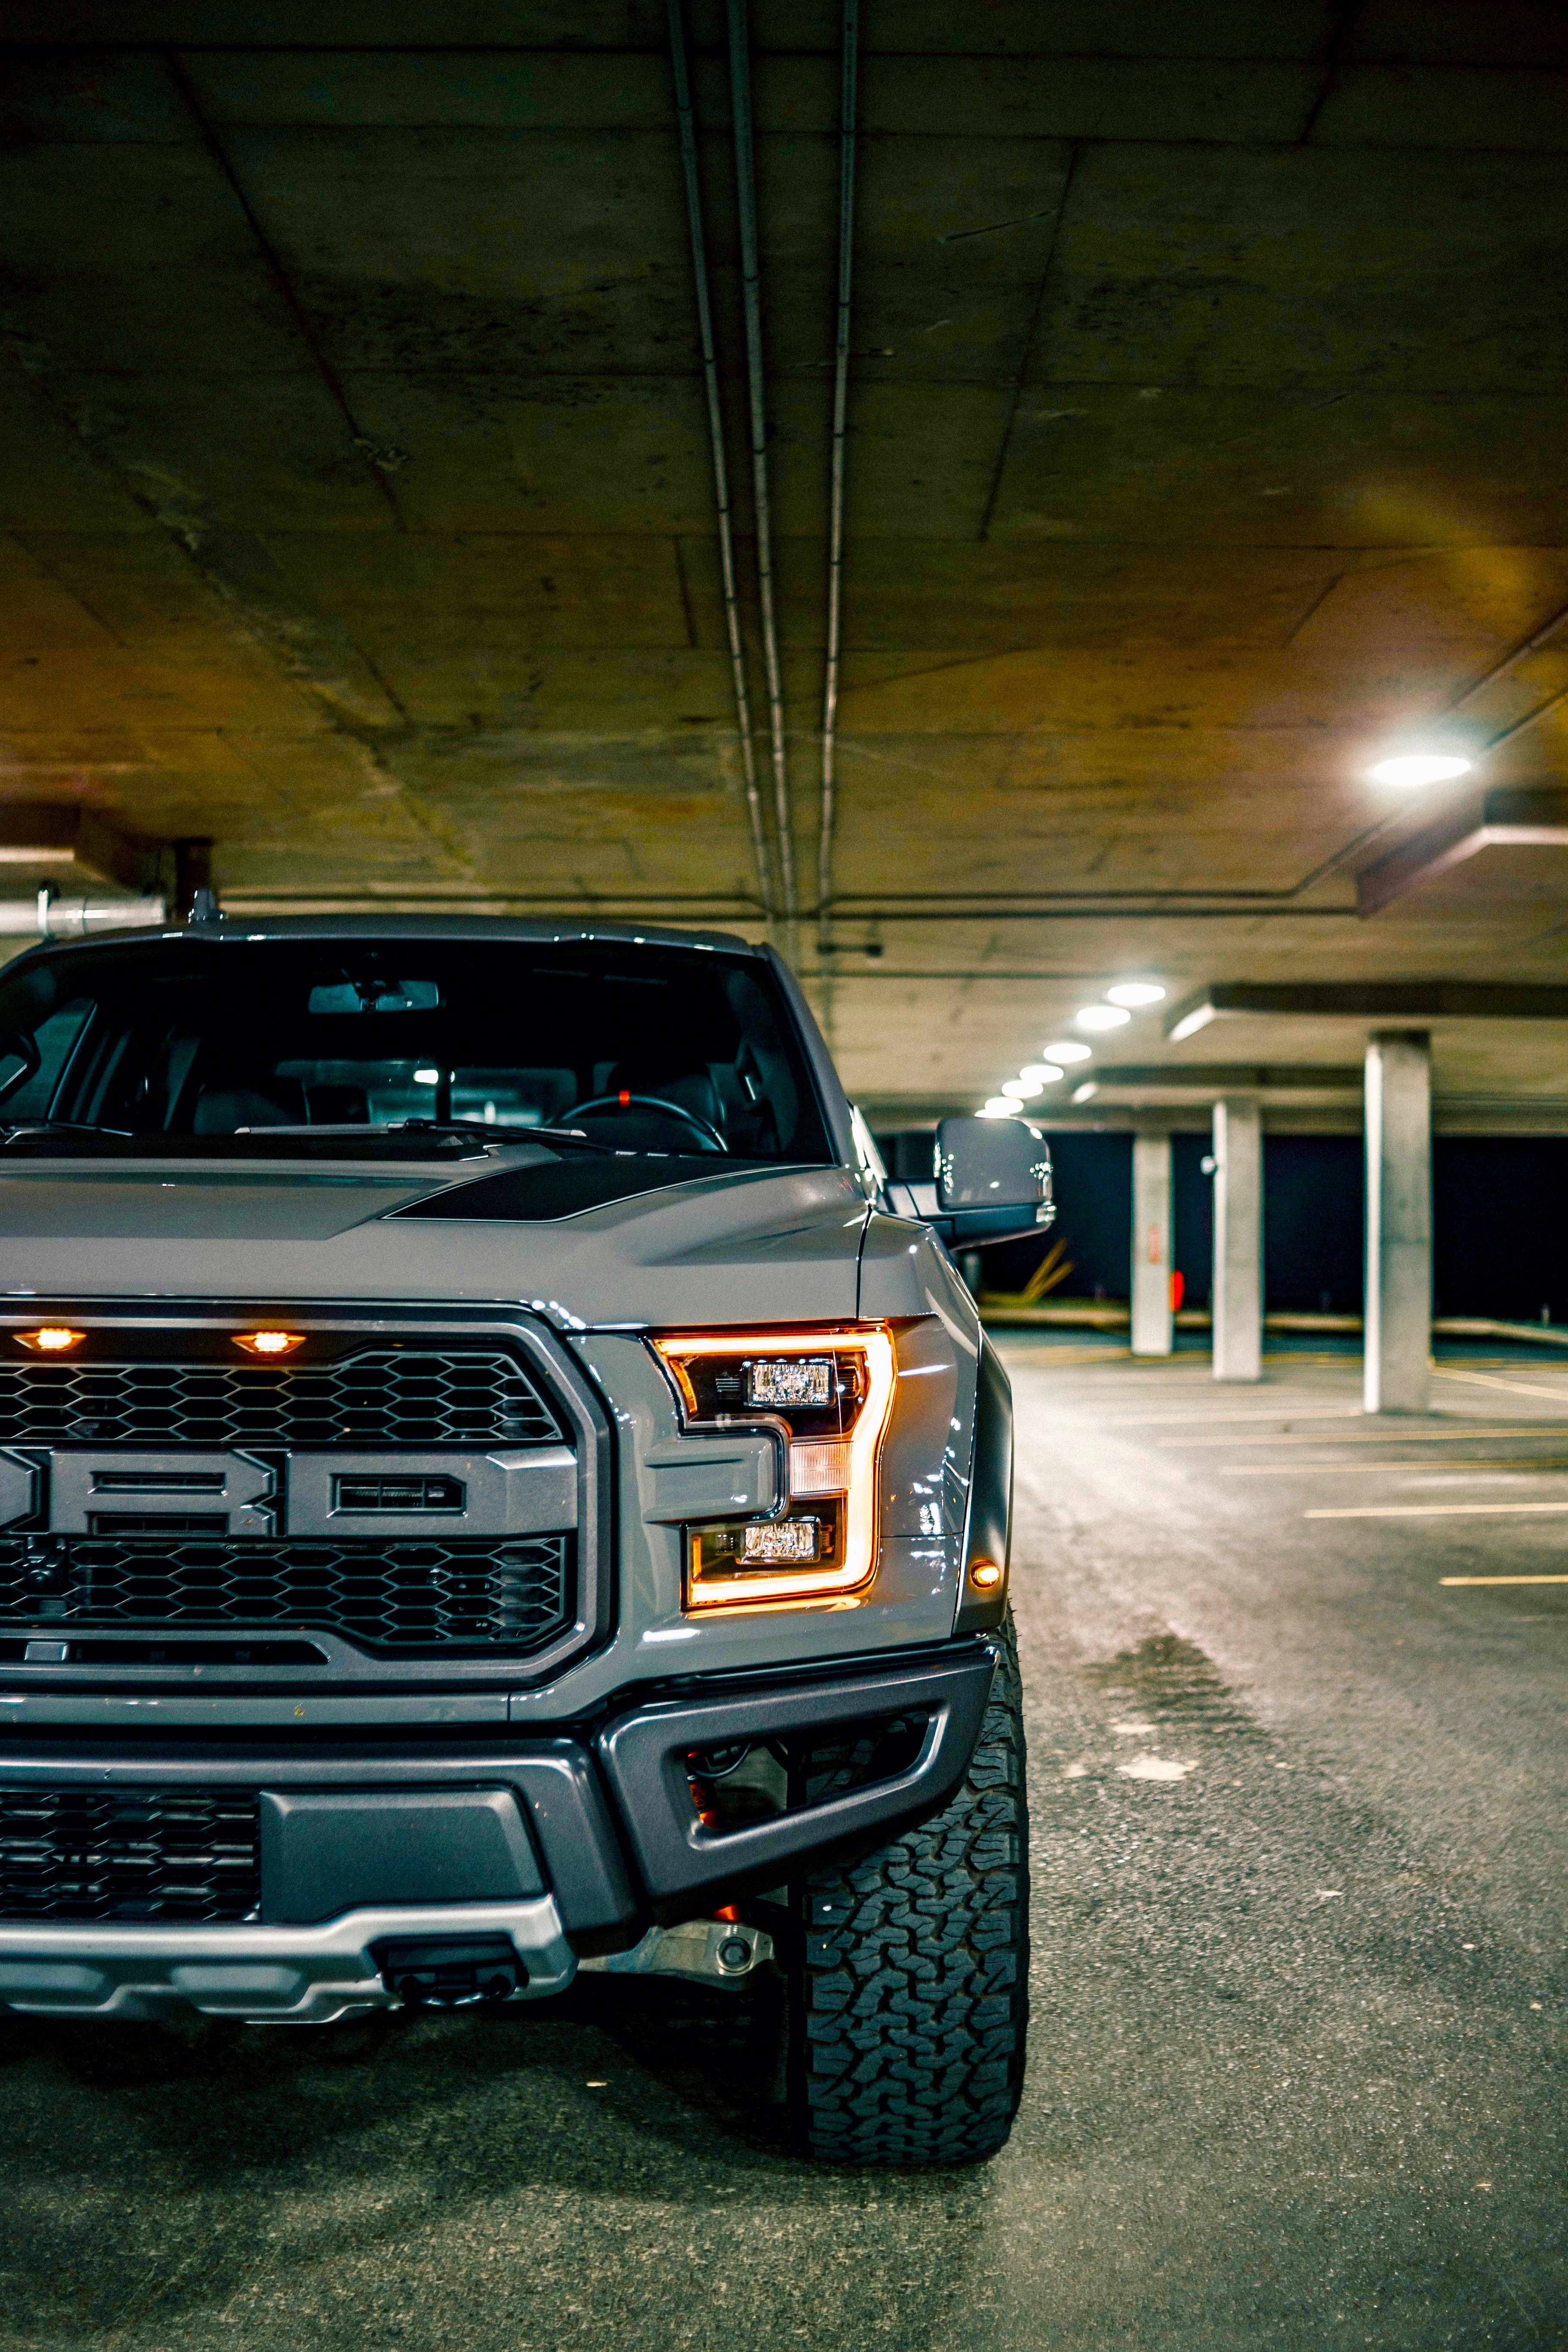 ford raptor, ford, suv, front view, car, cars, grey, parking